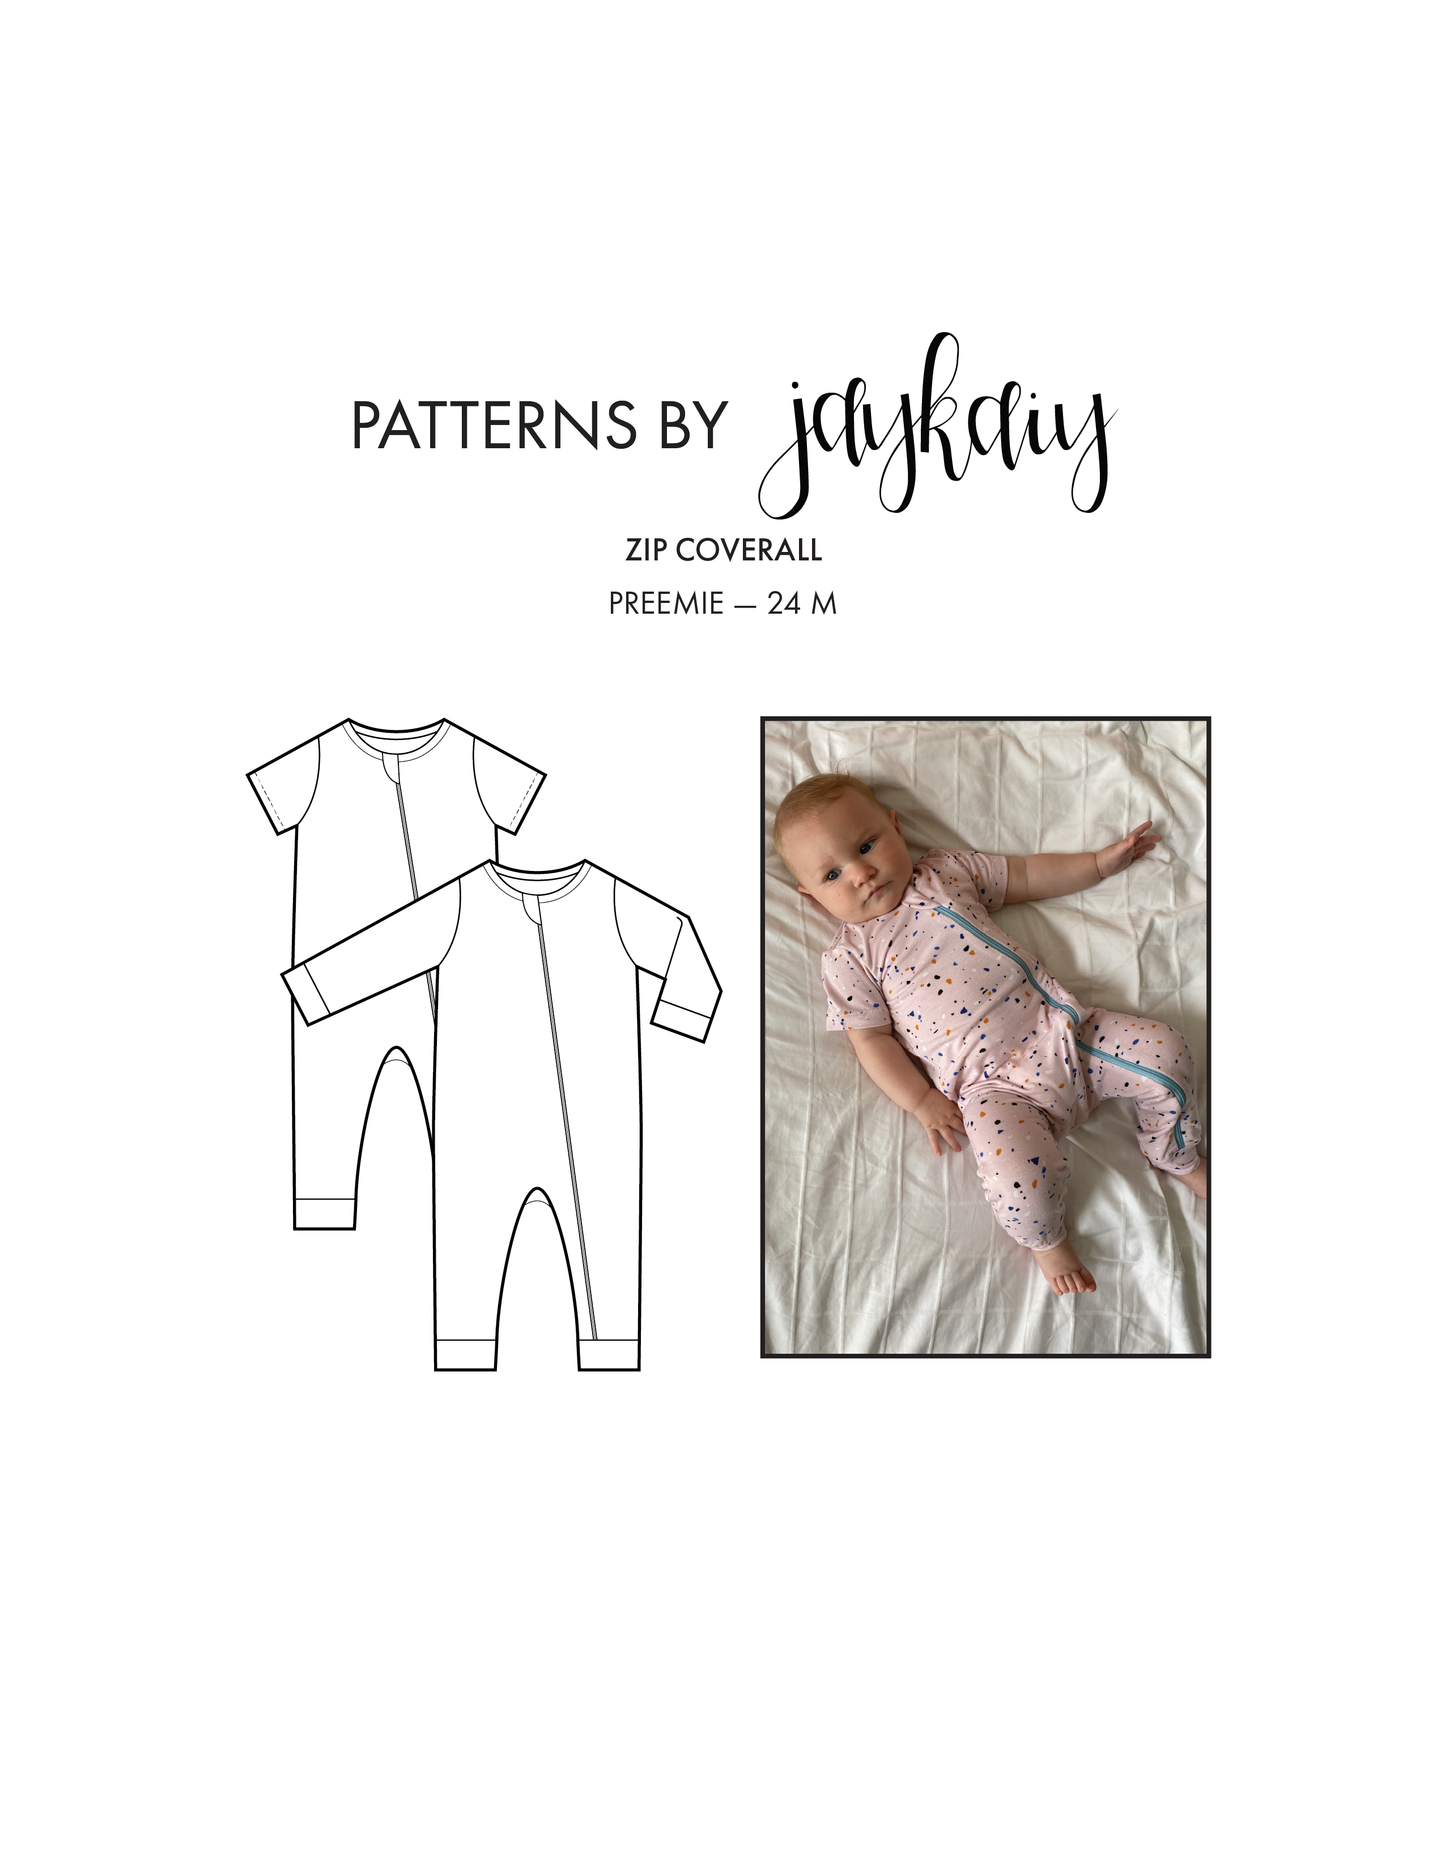 Footless Zip Coverall Pattern